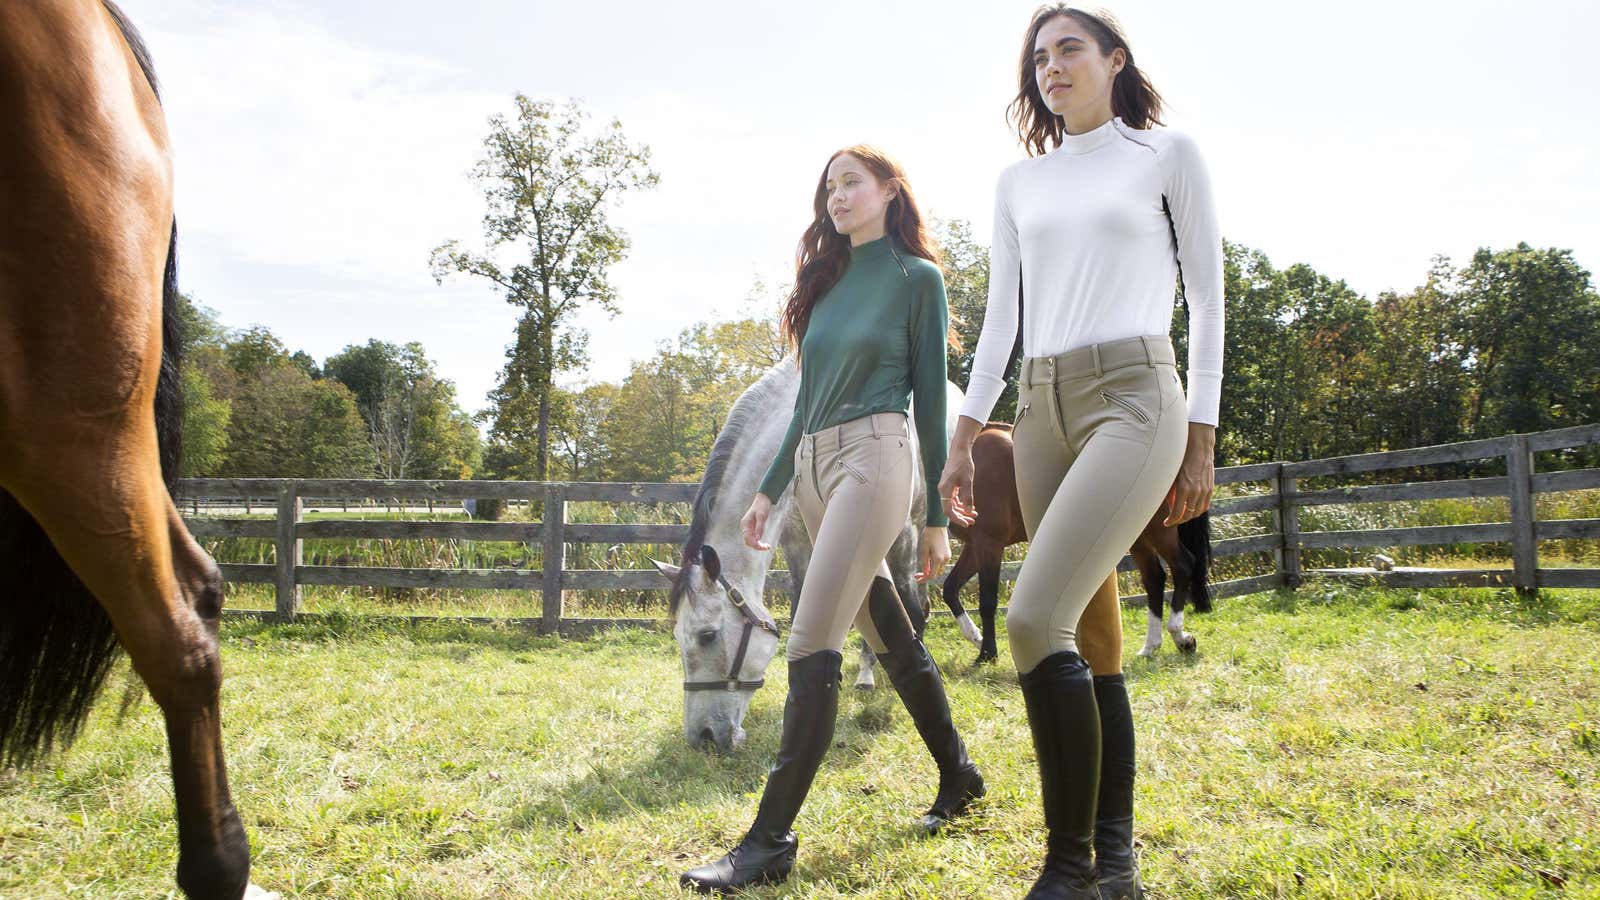 Horse riding clothes are the new (and original) athleisure